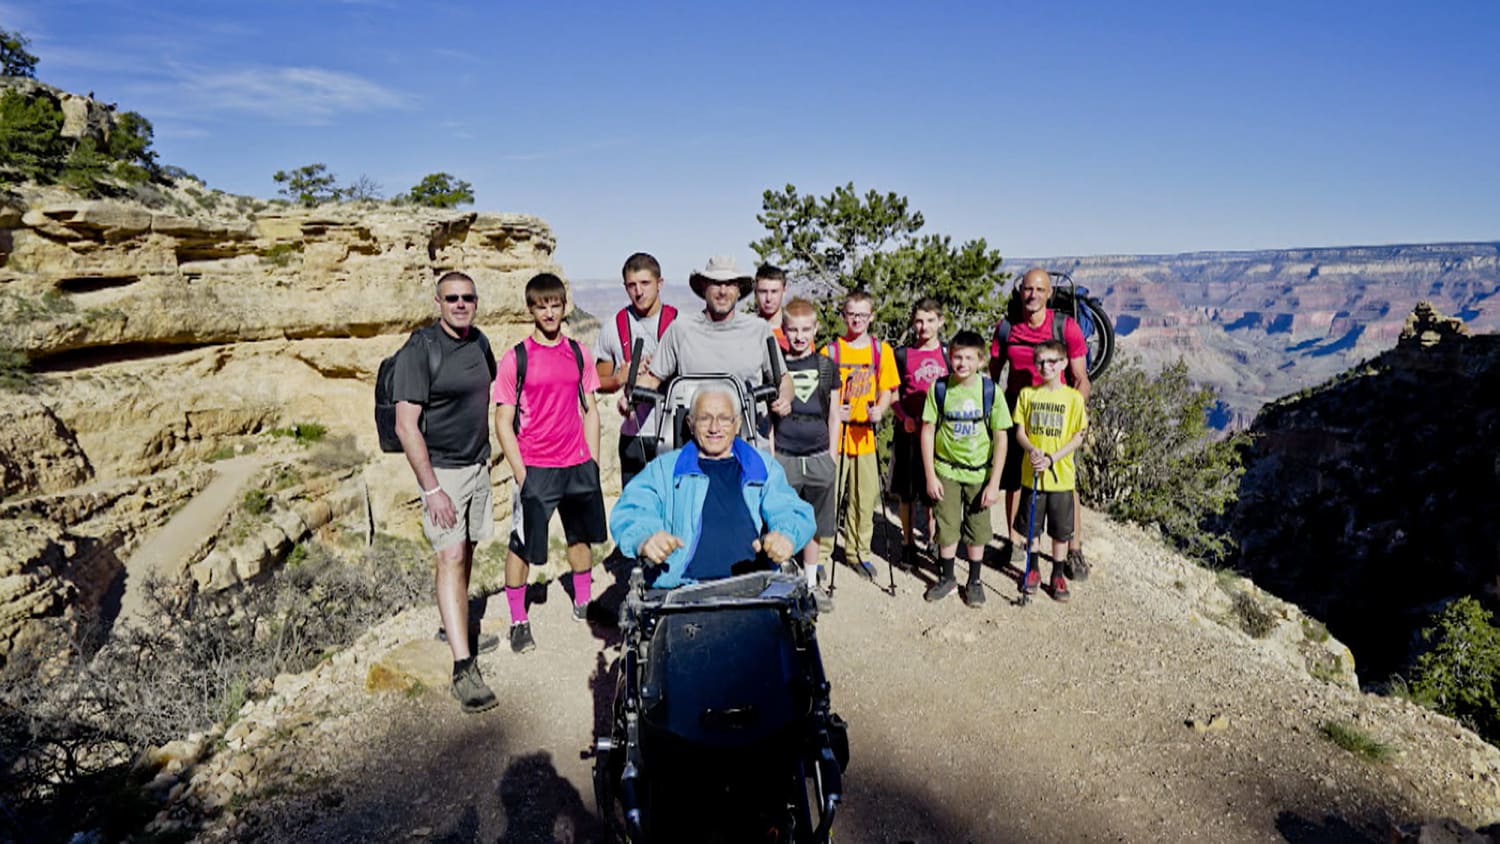 Paralyzed man hikes Grand Canyon with help of sons, grandsons - TODAY.com2500 x 1407